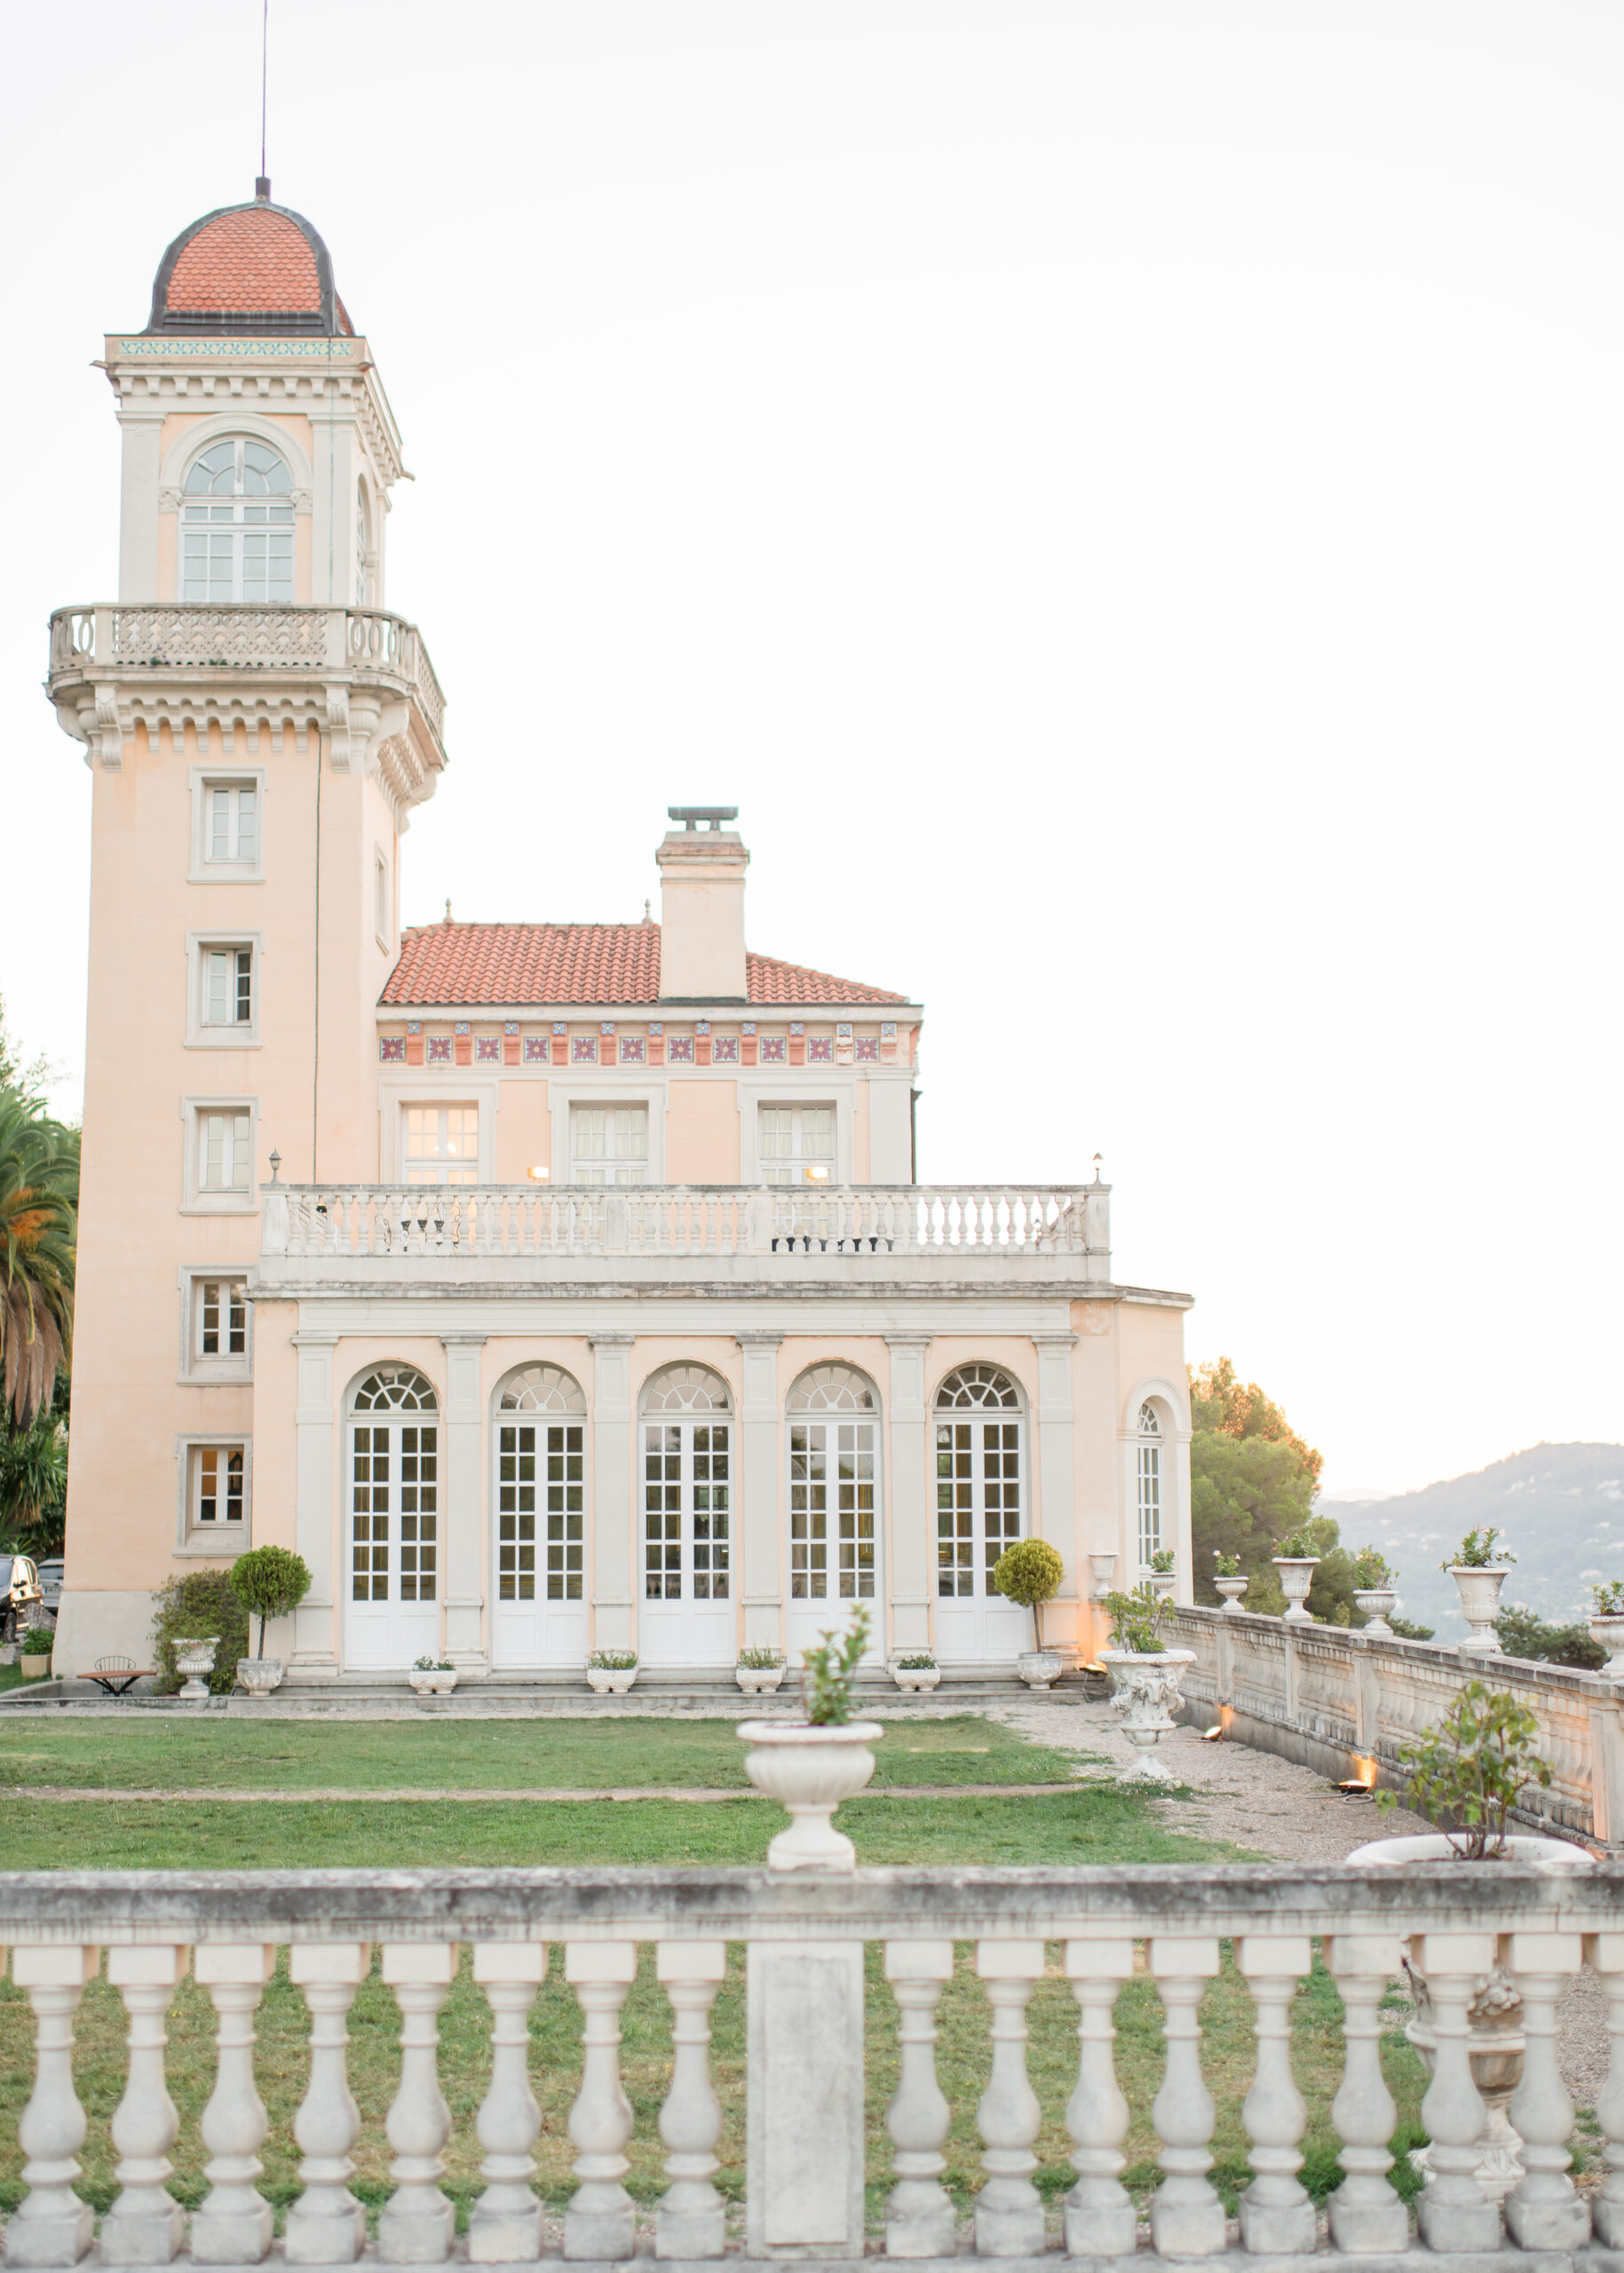 South of France Wedding Venues